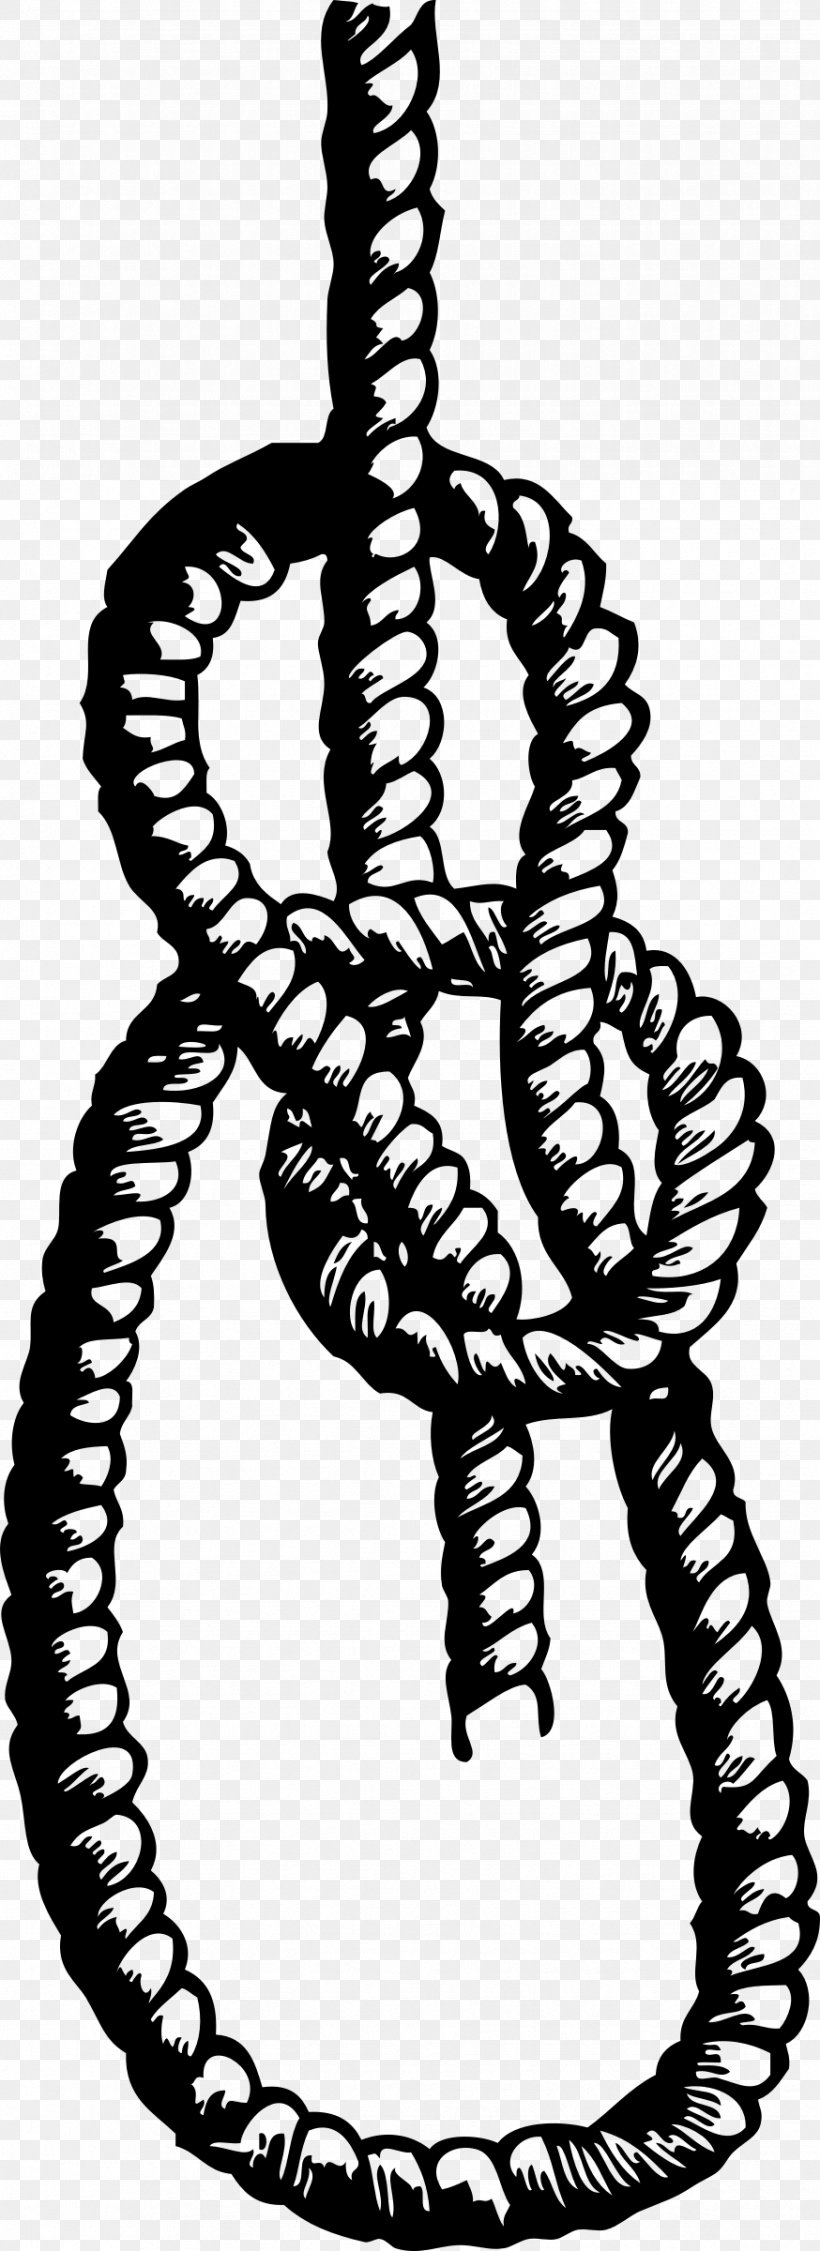 Seizing Knot Clip Art, PNG, 874x2400px, Seizing, Black And White, Bowline, Bowline On A Bight, Knot Download Free